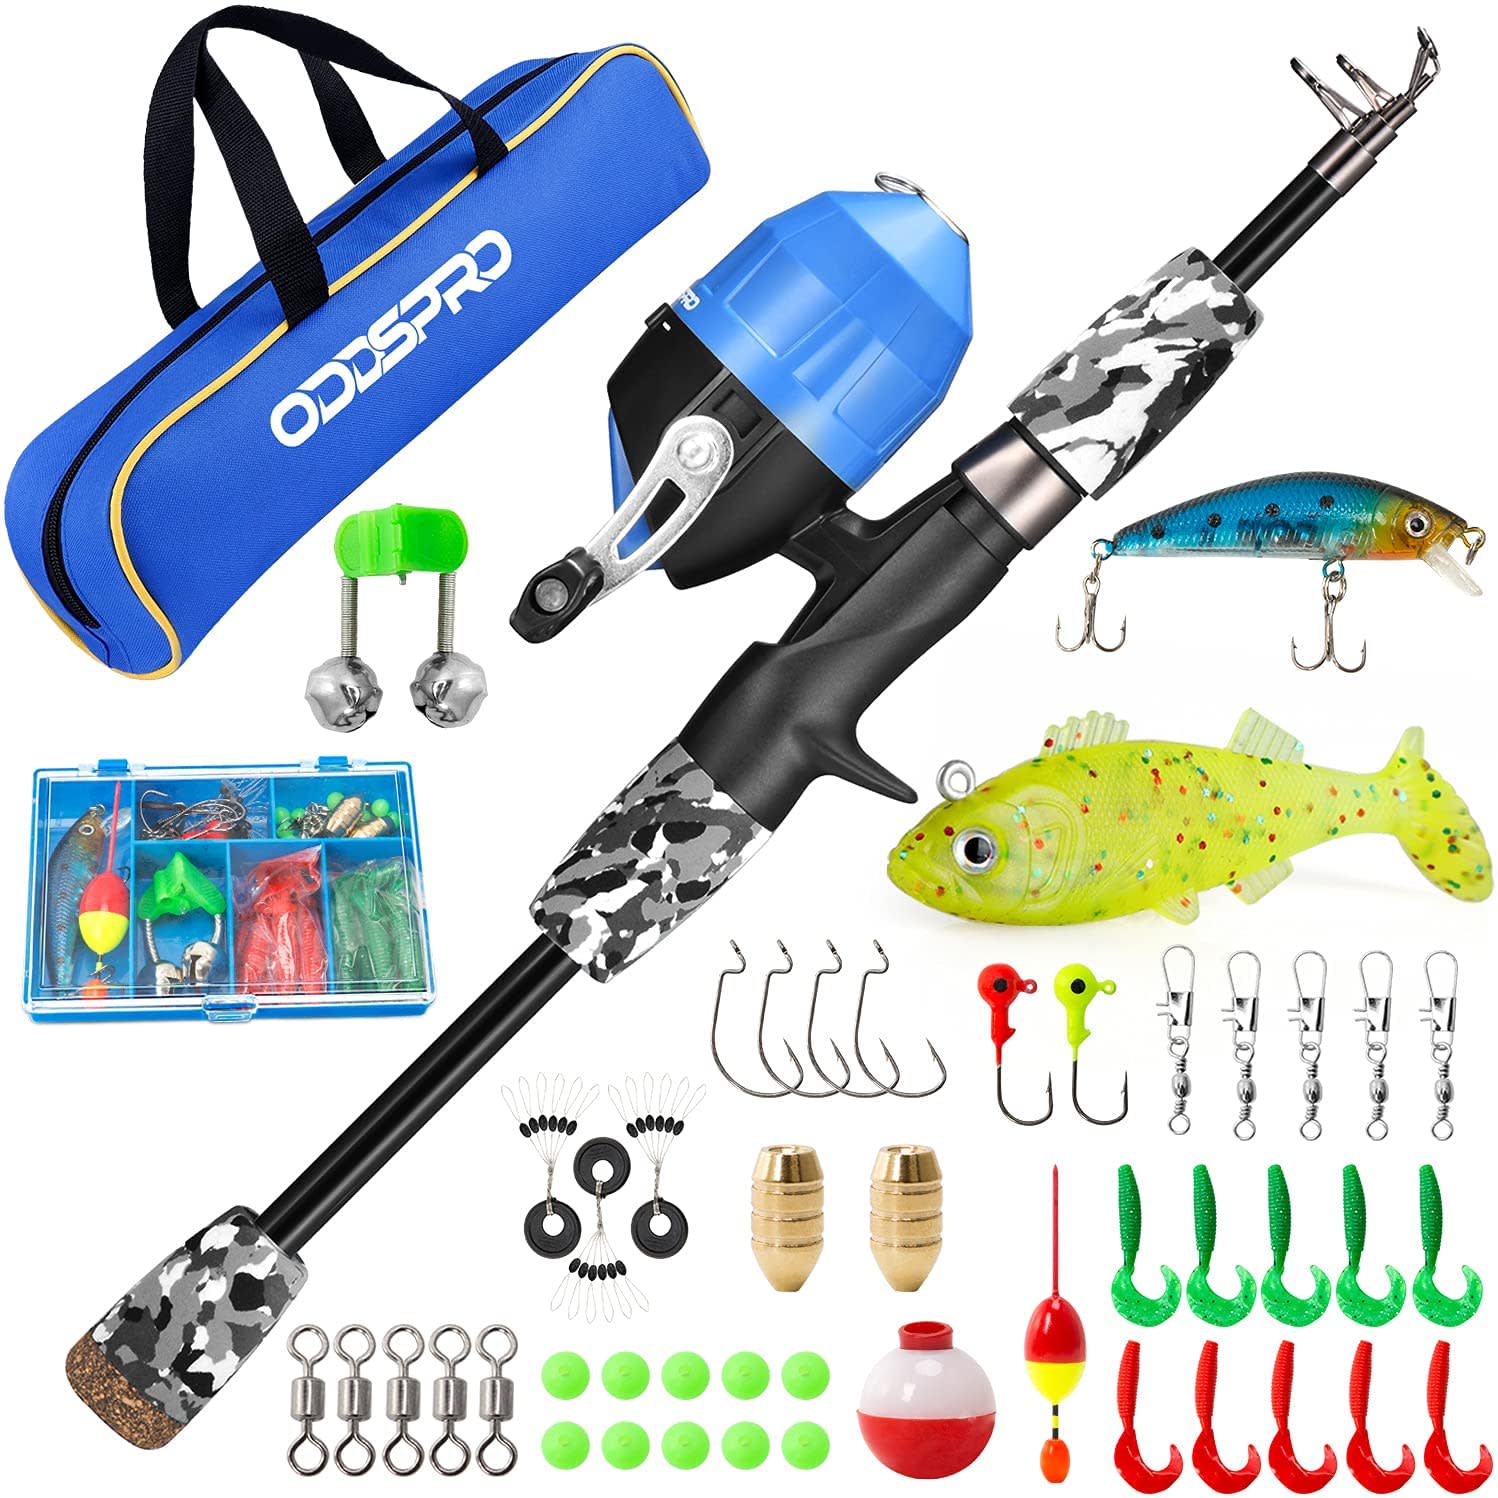 SUPERHOMUSE Travel Collapsible Fishing Rod India